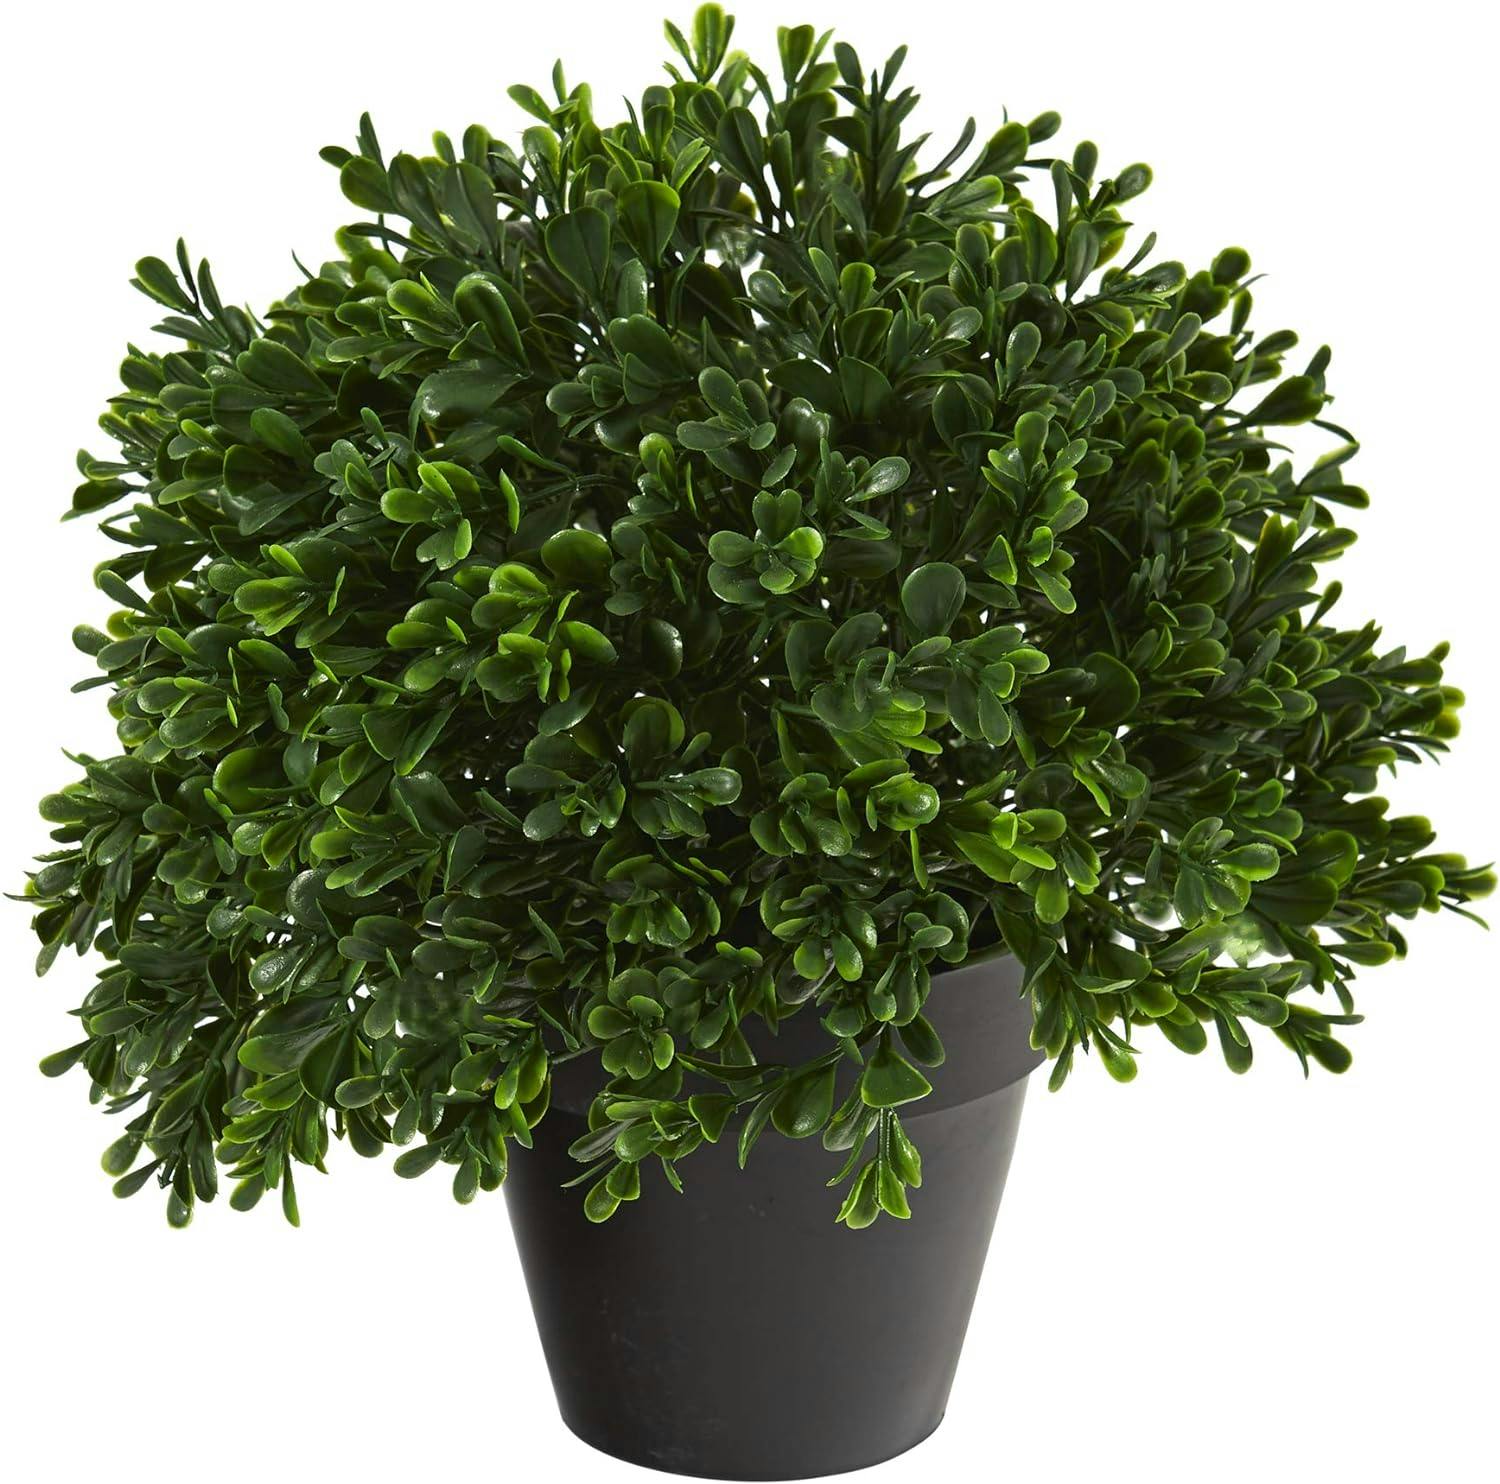 Verdant Boxwood 10" Artificial Topiary in Plastic Pot for Outdoor Use